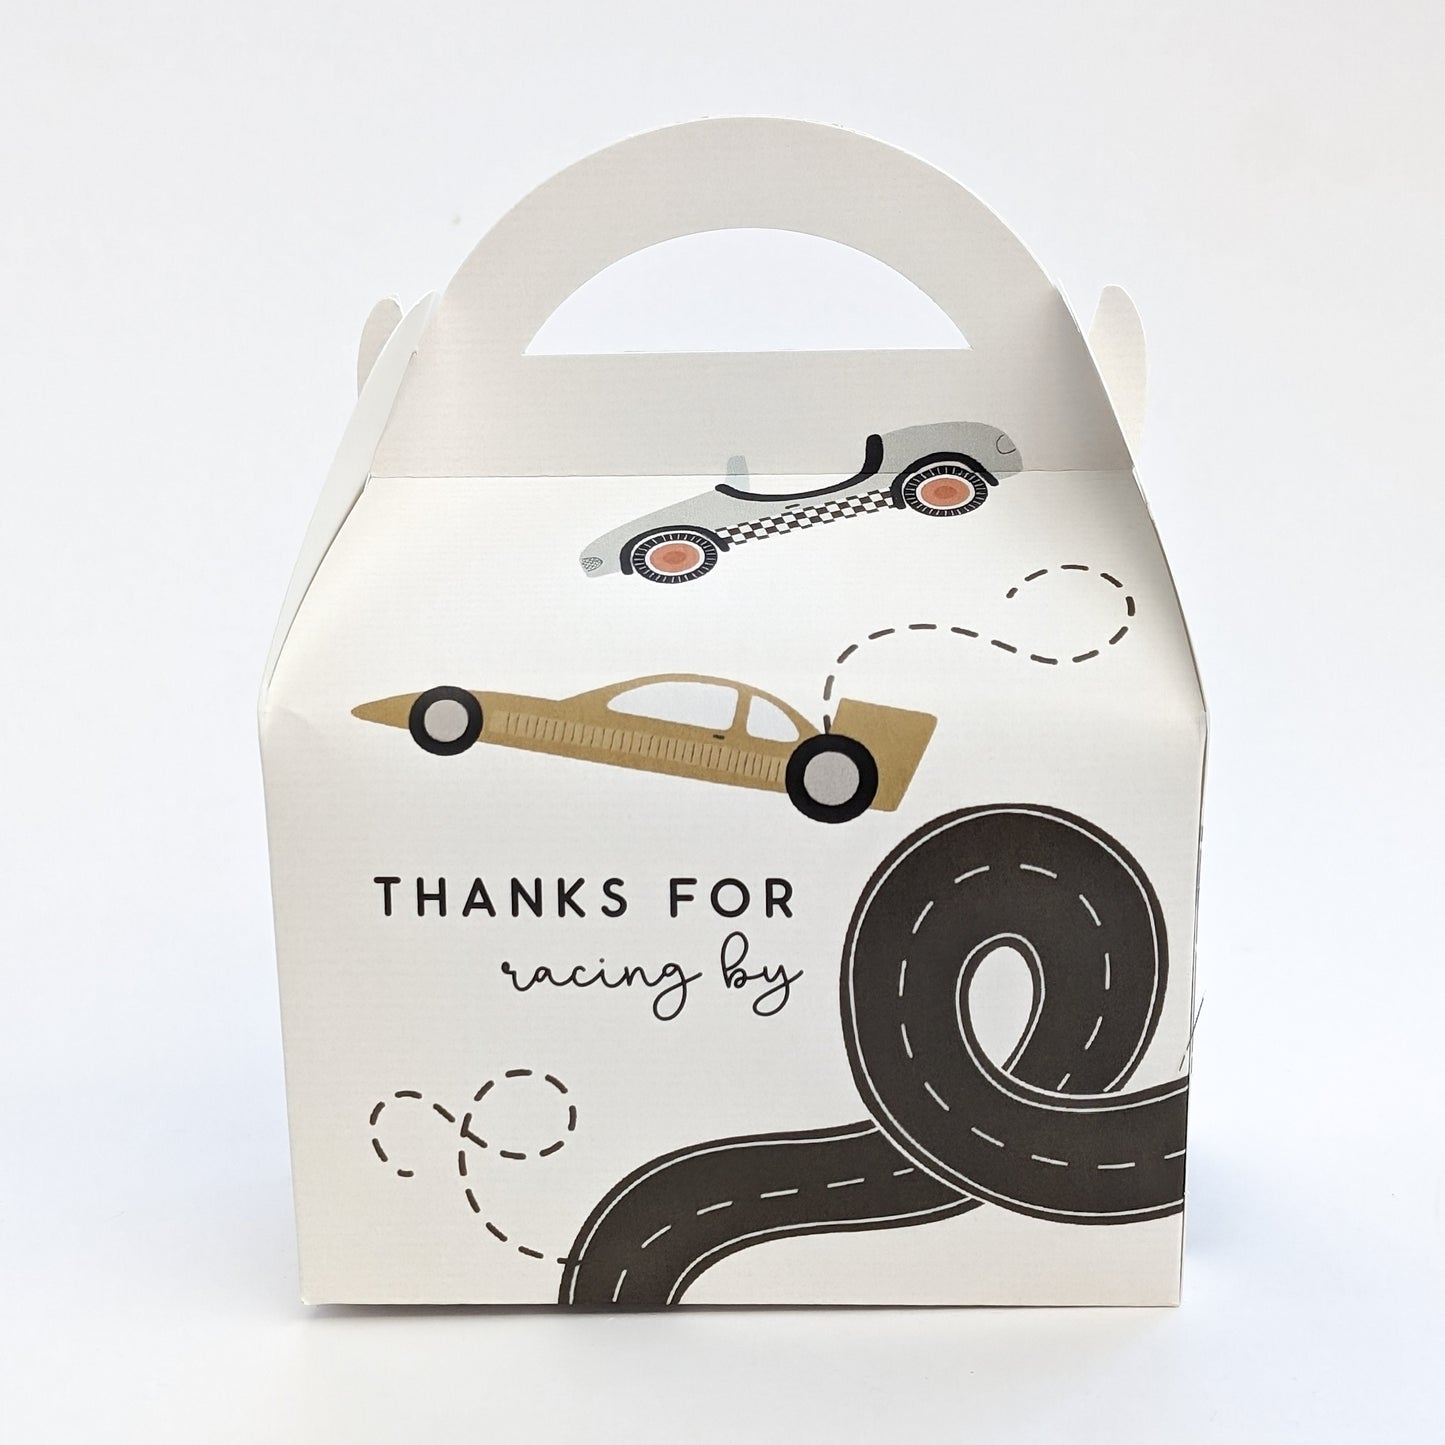 Retro Cars Racing Driver Neutral Personalised Children’s Party Boxes Gift Bag Favour